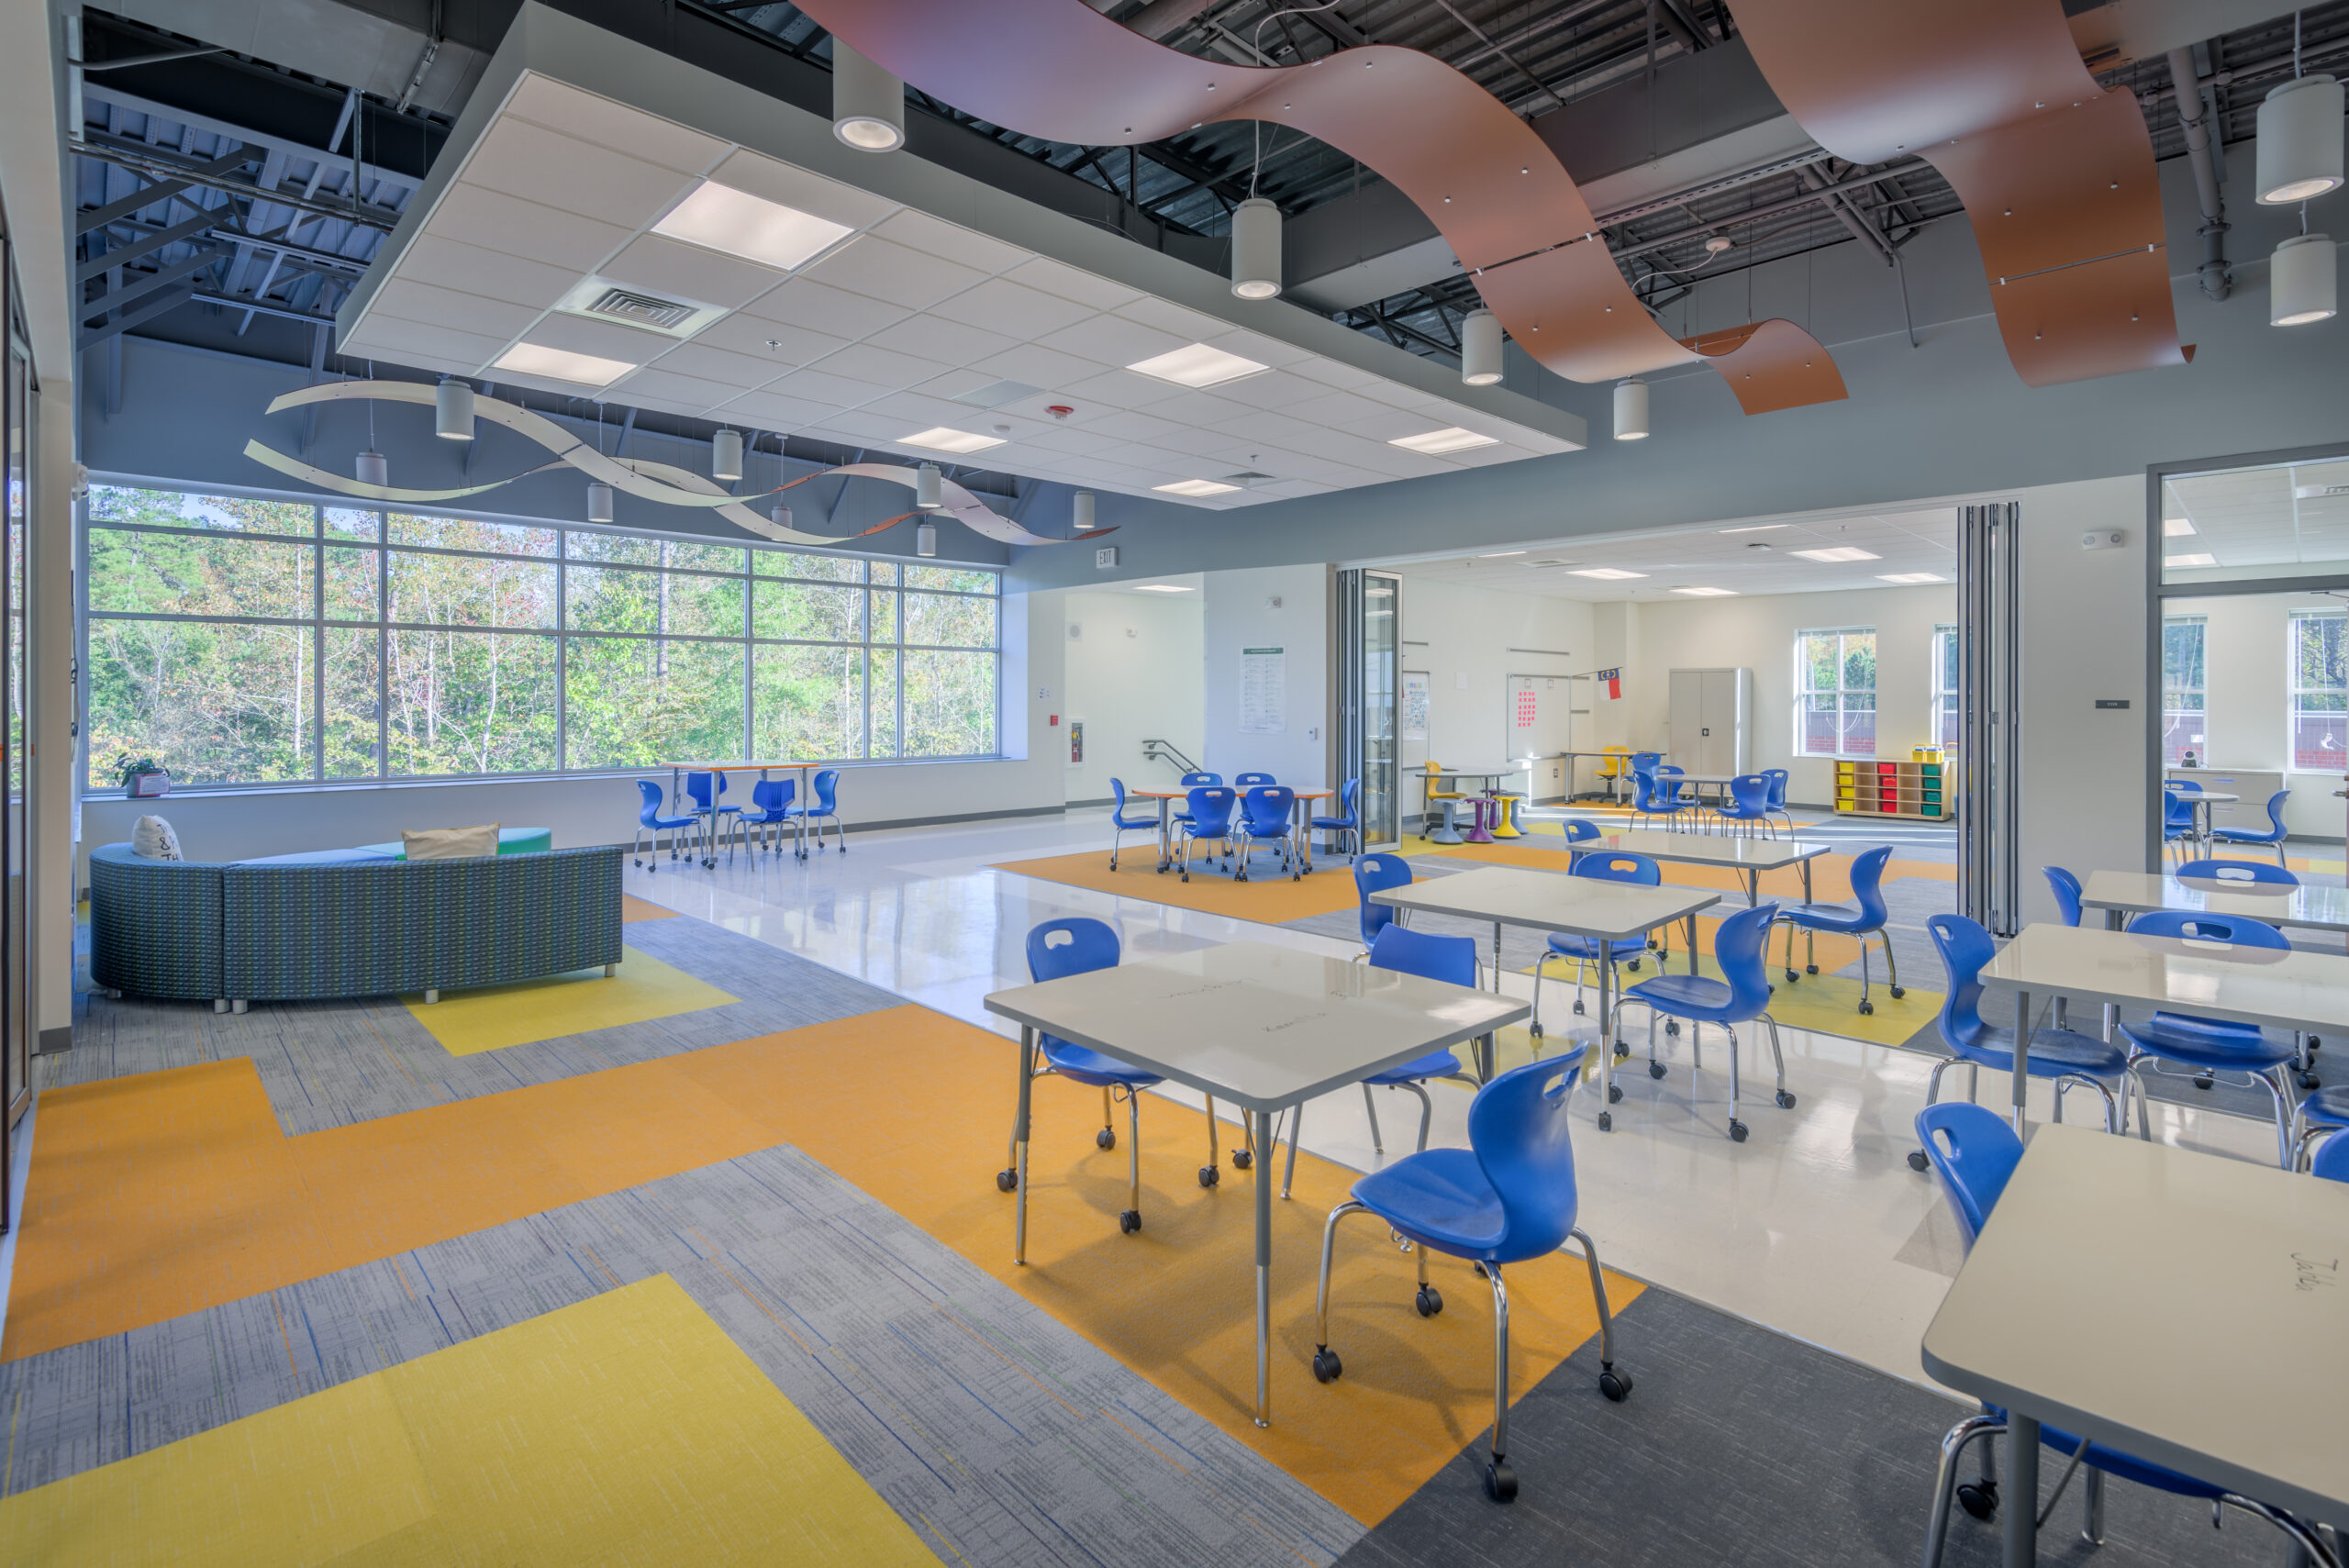 Barton Pond Elementary School Flex Space with Tables, Chairs, Transparent Room Dividers, and Decorative Ceiling Details